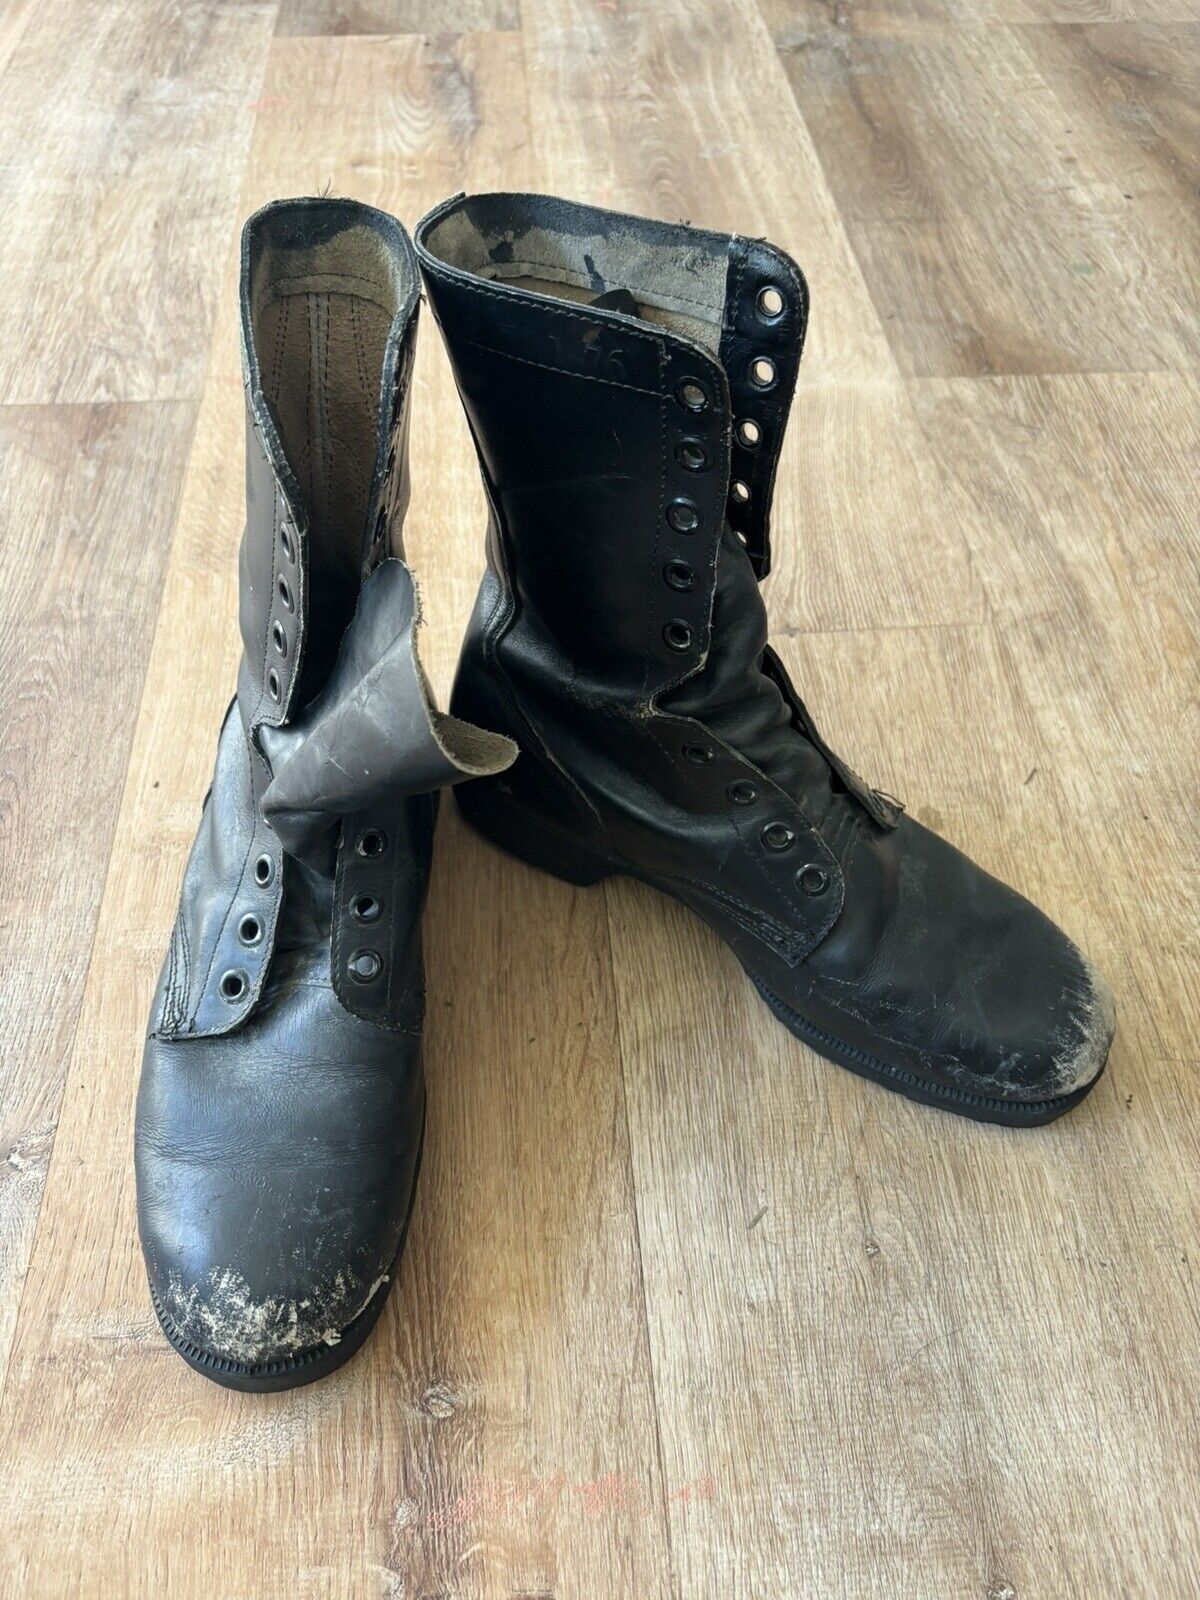 Size 10 R Black Leather Military Boots 